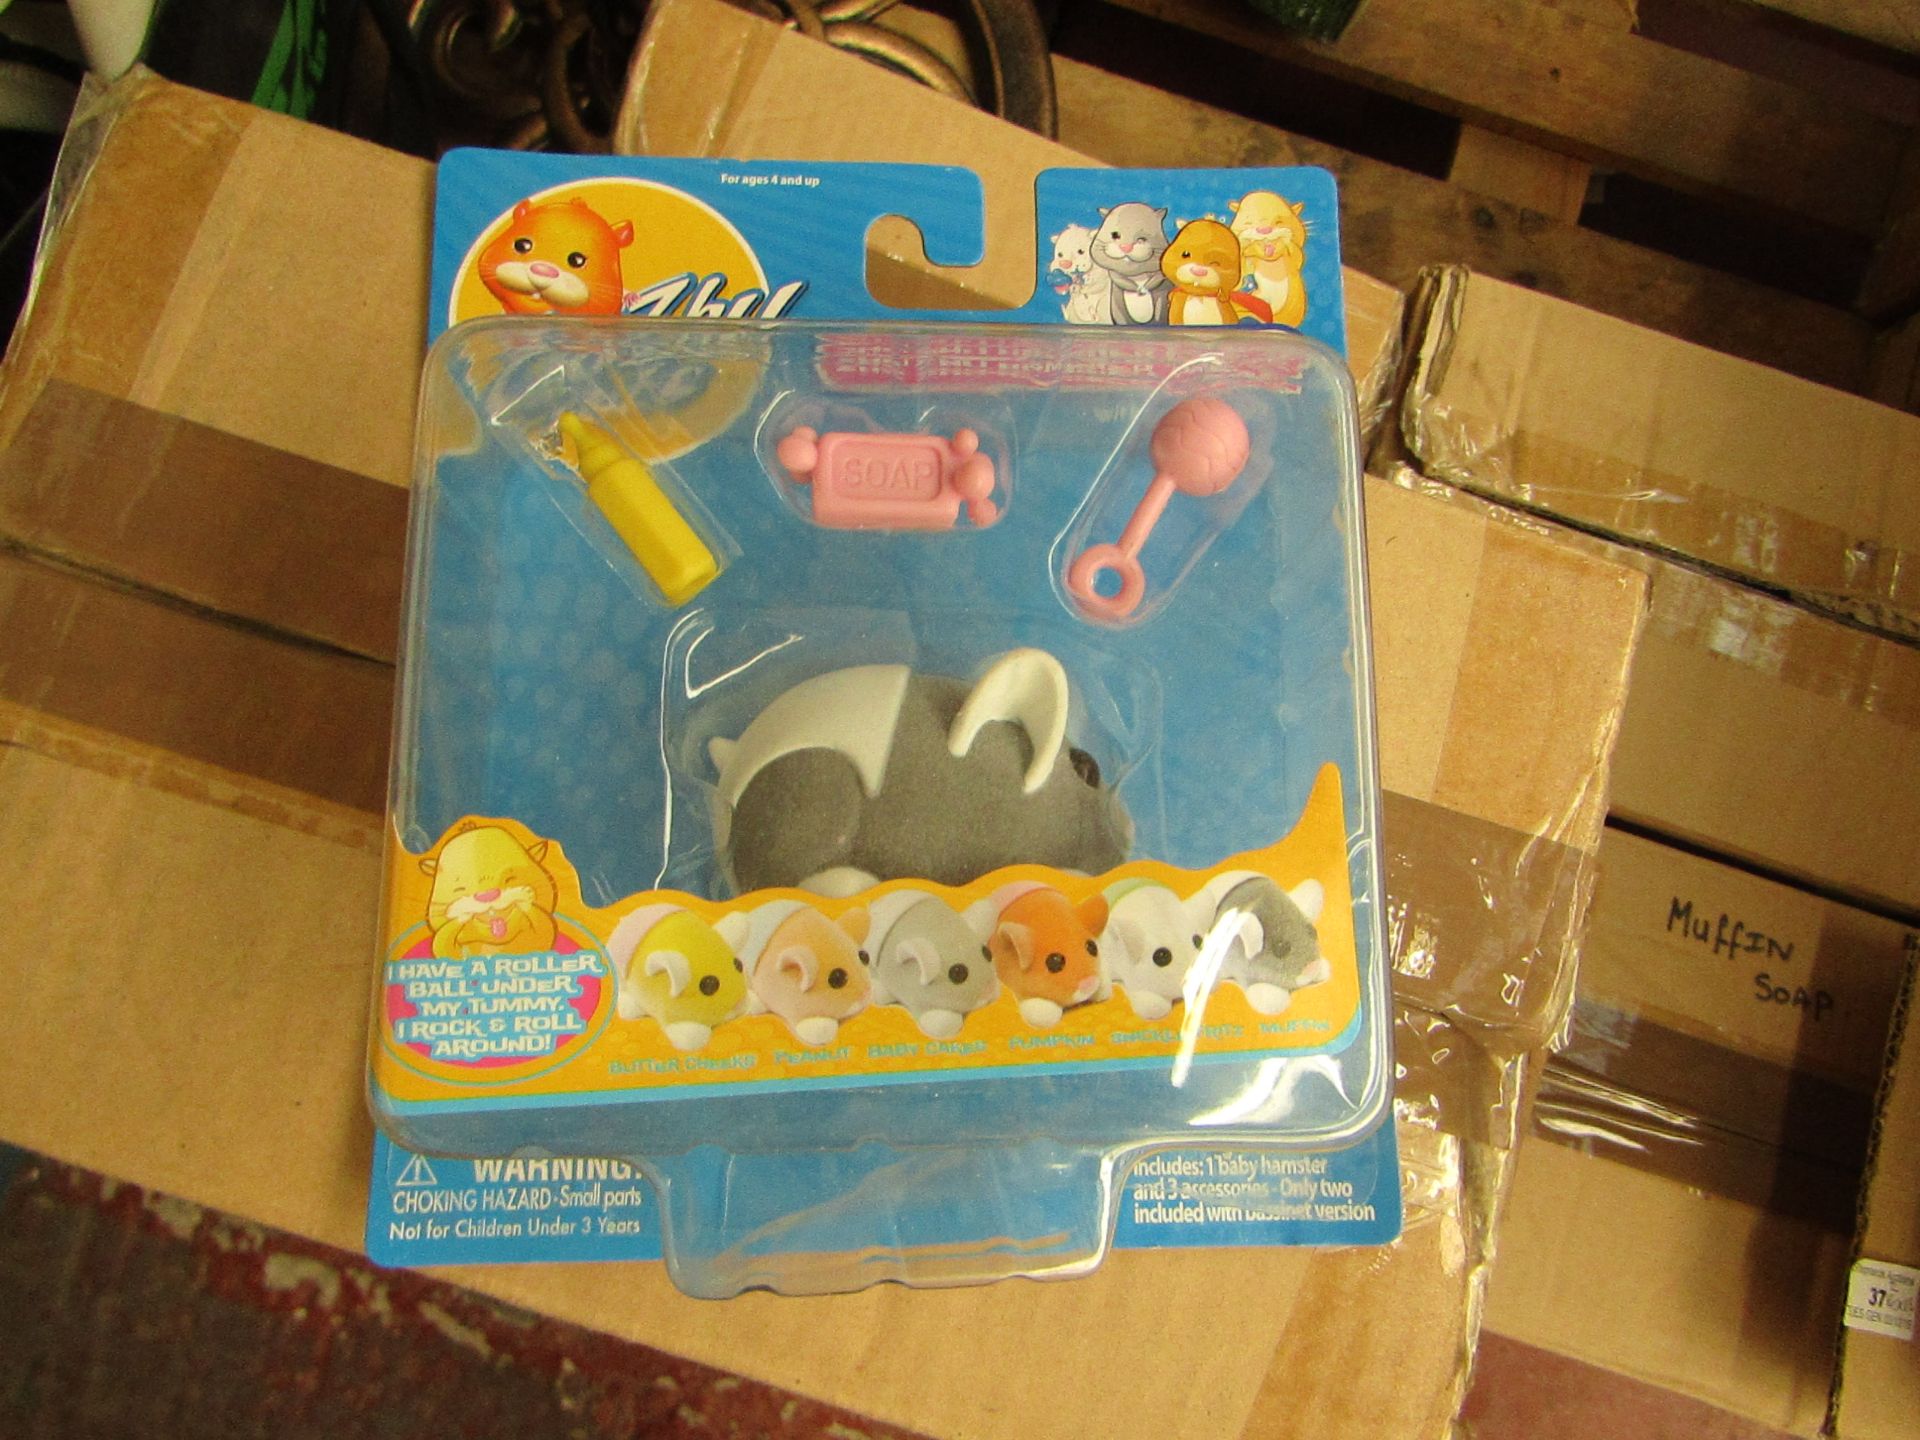 Box of 8 Zhu Zhu Hamster Babies. Includes Baby Hamster & 3 accessories. New & Packaged. Ideal